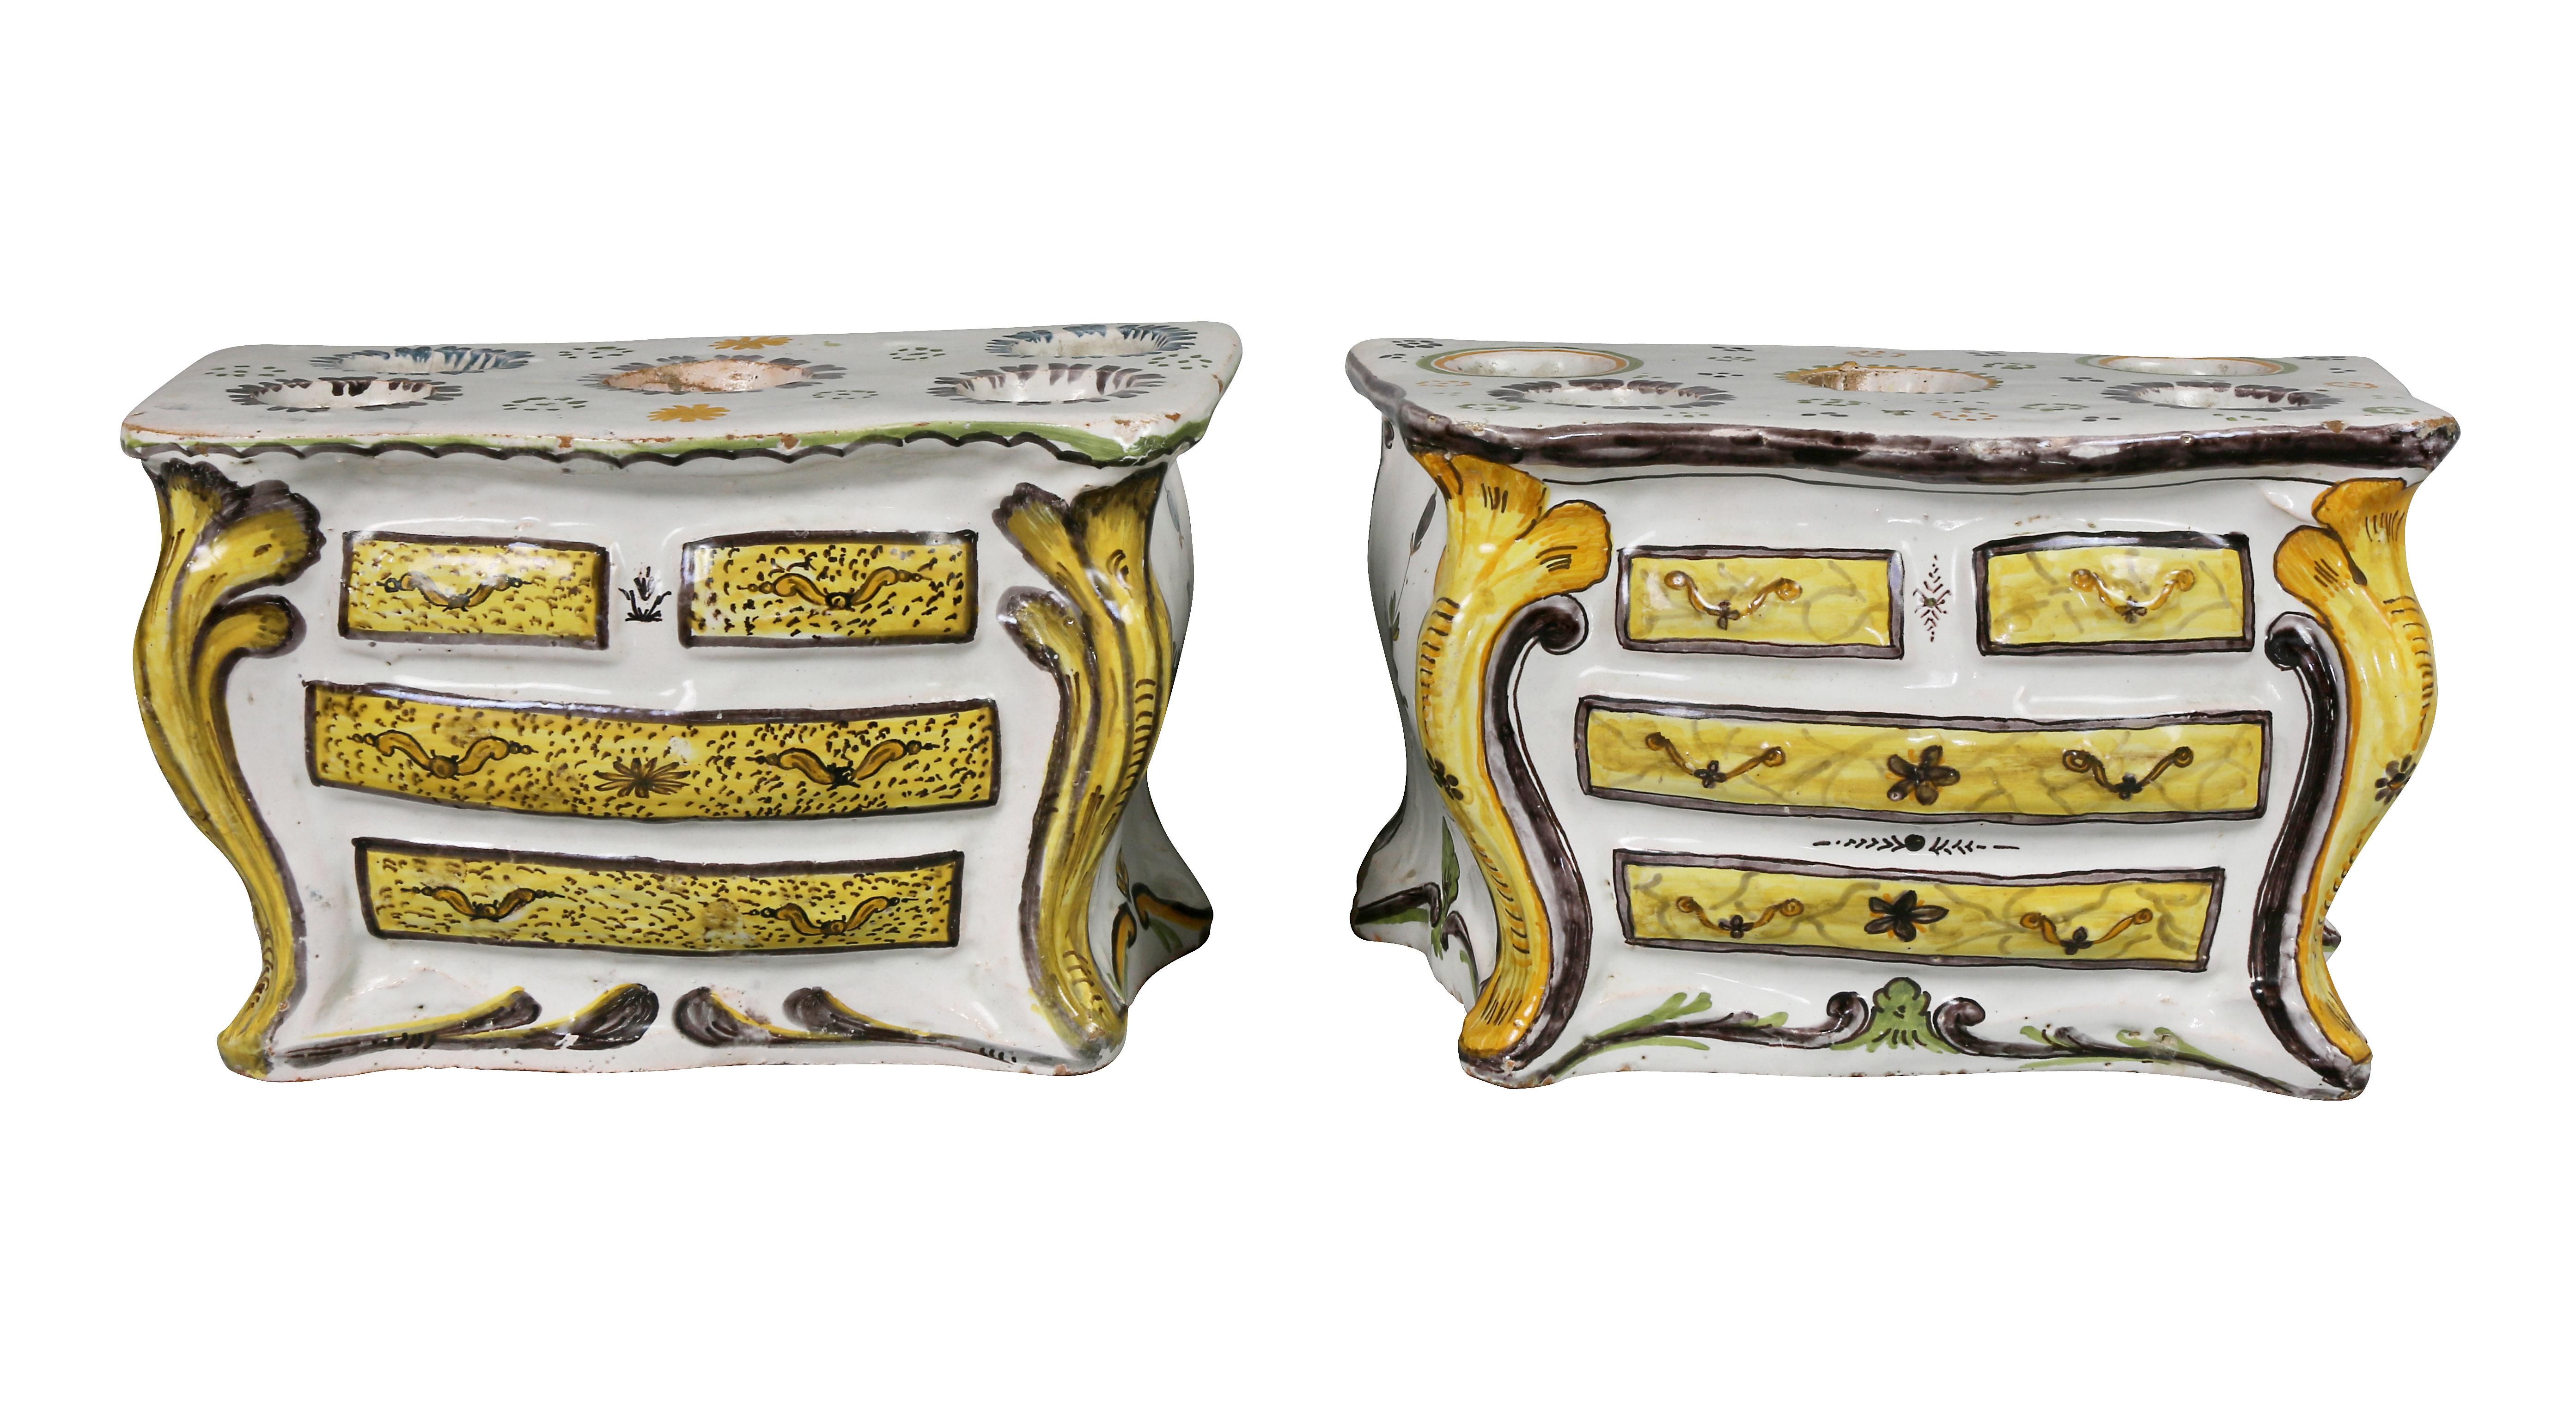 Pair of French Faience Bough Pots in the Form of Commodes In Good Condition For Sale In Essex, MA